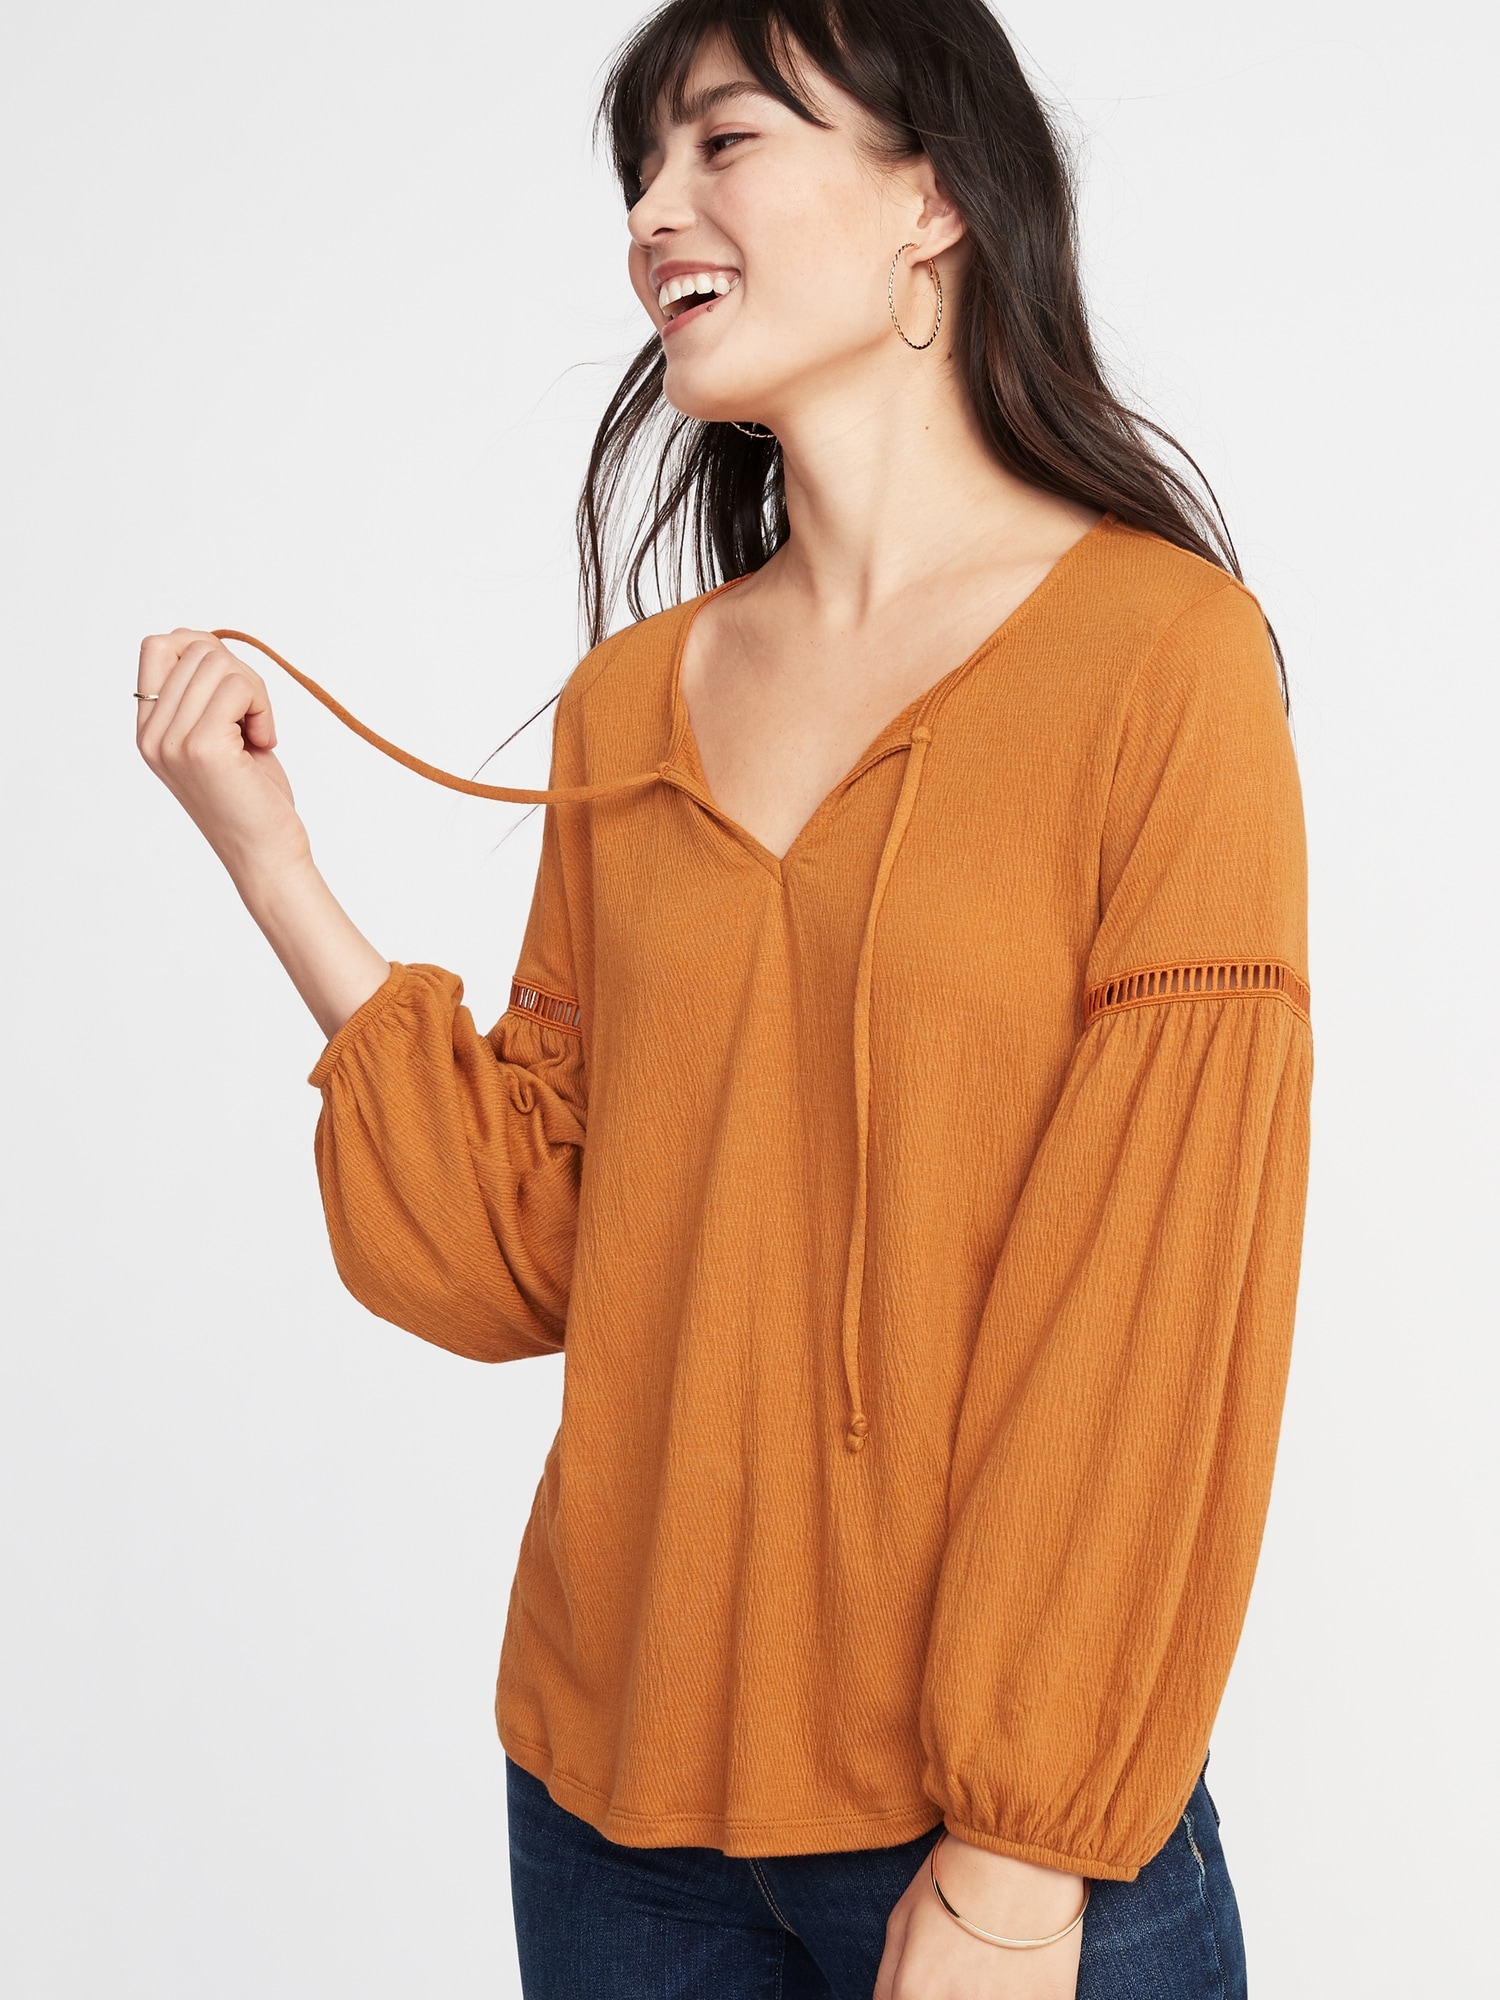 Relaxed Tie-Neck Peasant Top for Women